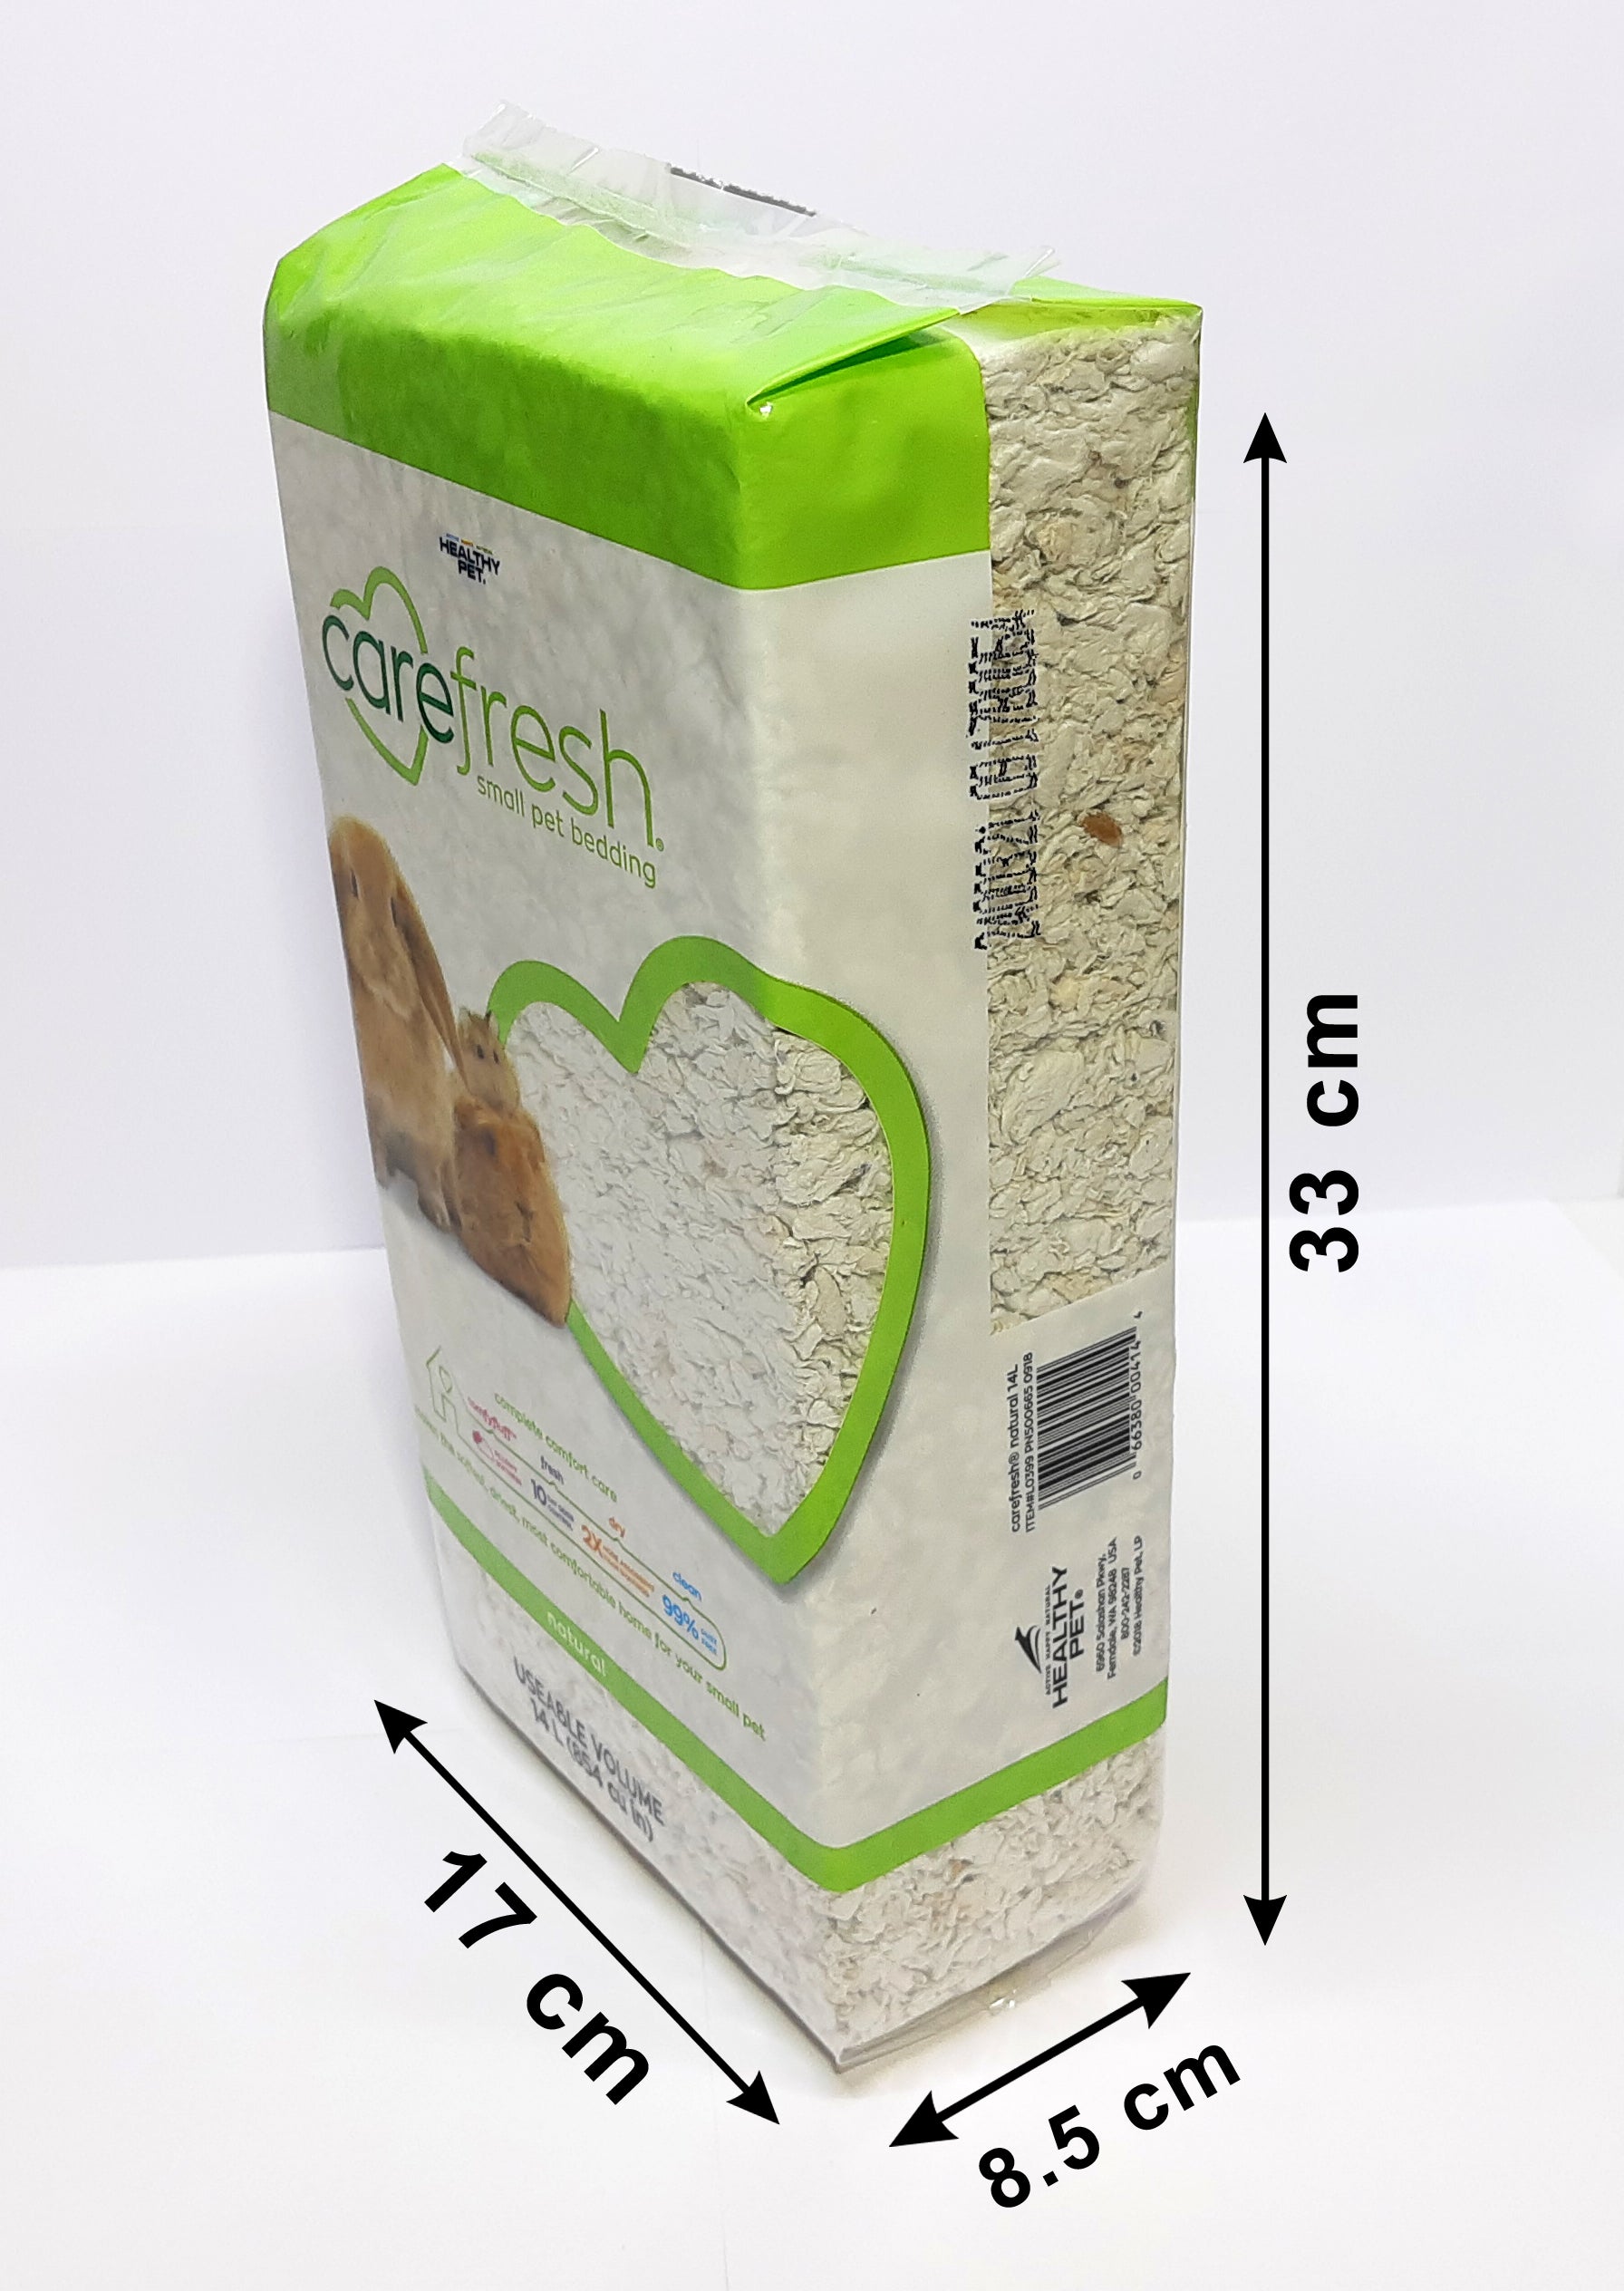 Carefresh Natural Substrate 14 Lt (730 grs)